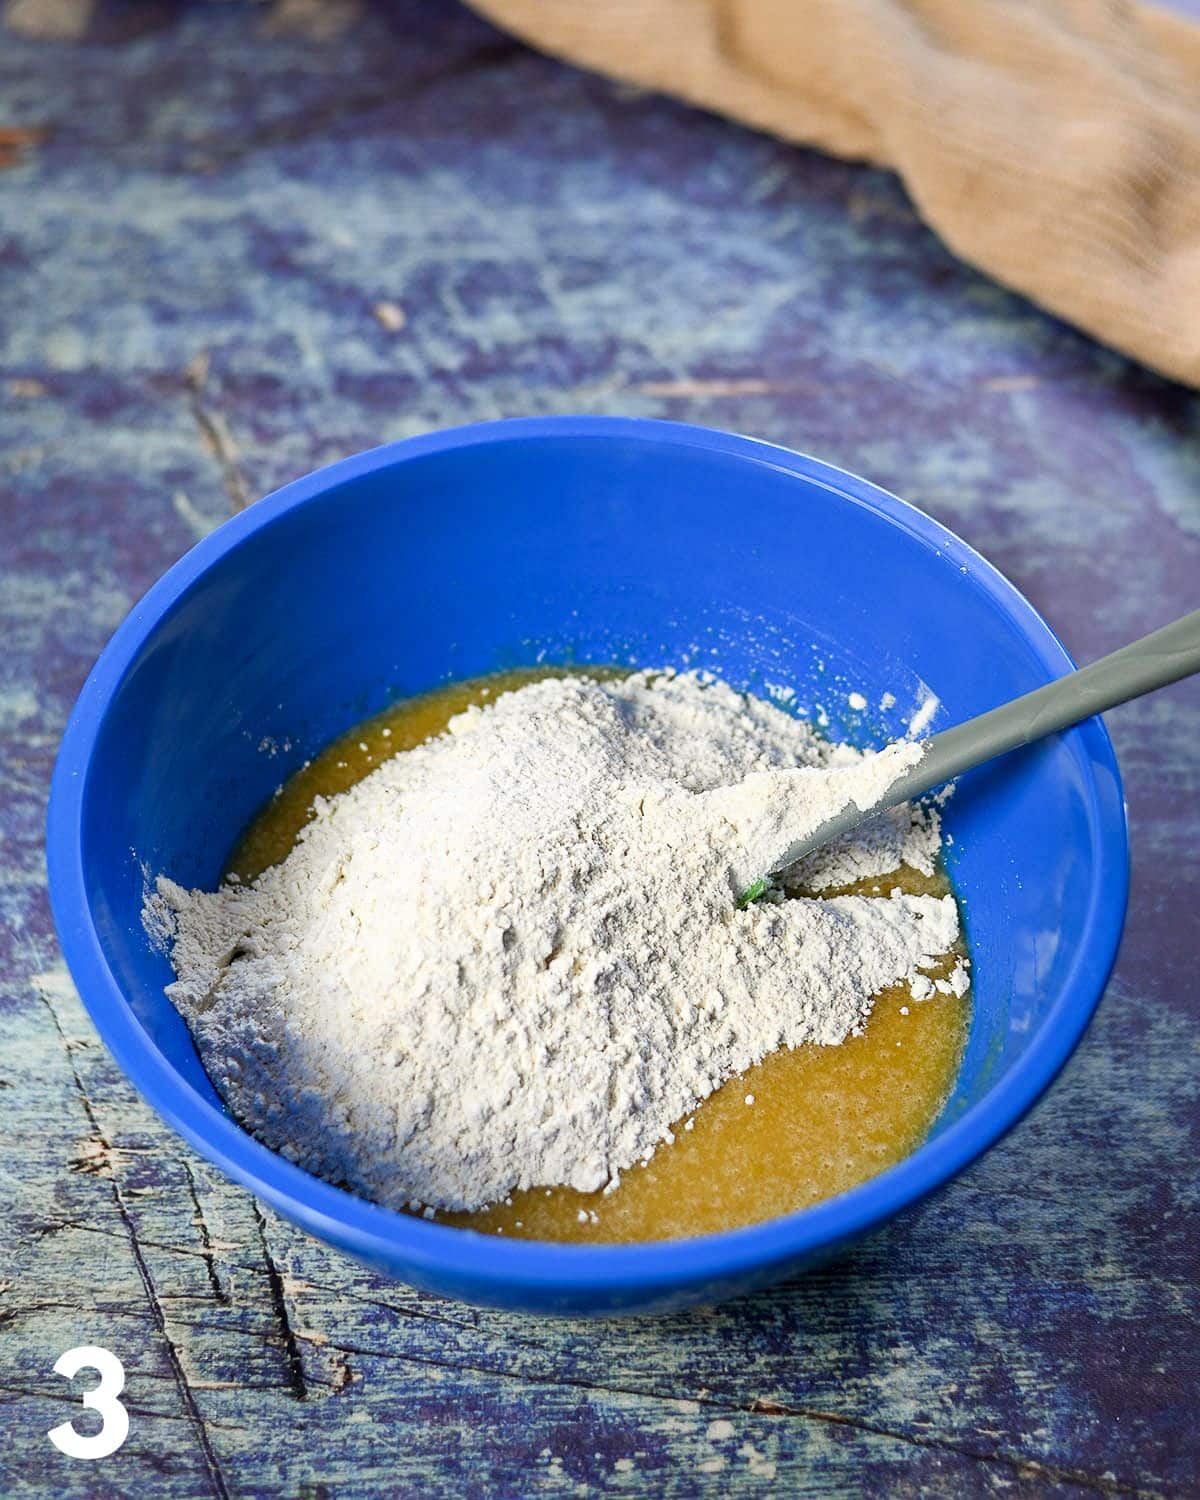 Mixing together dry and wet ingredients in a large blue bowl for cake.